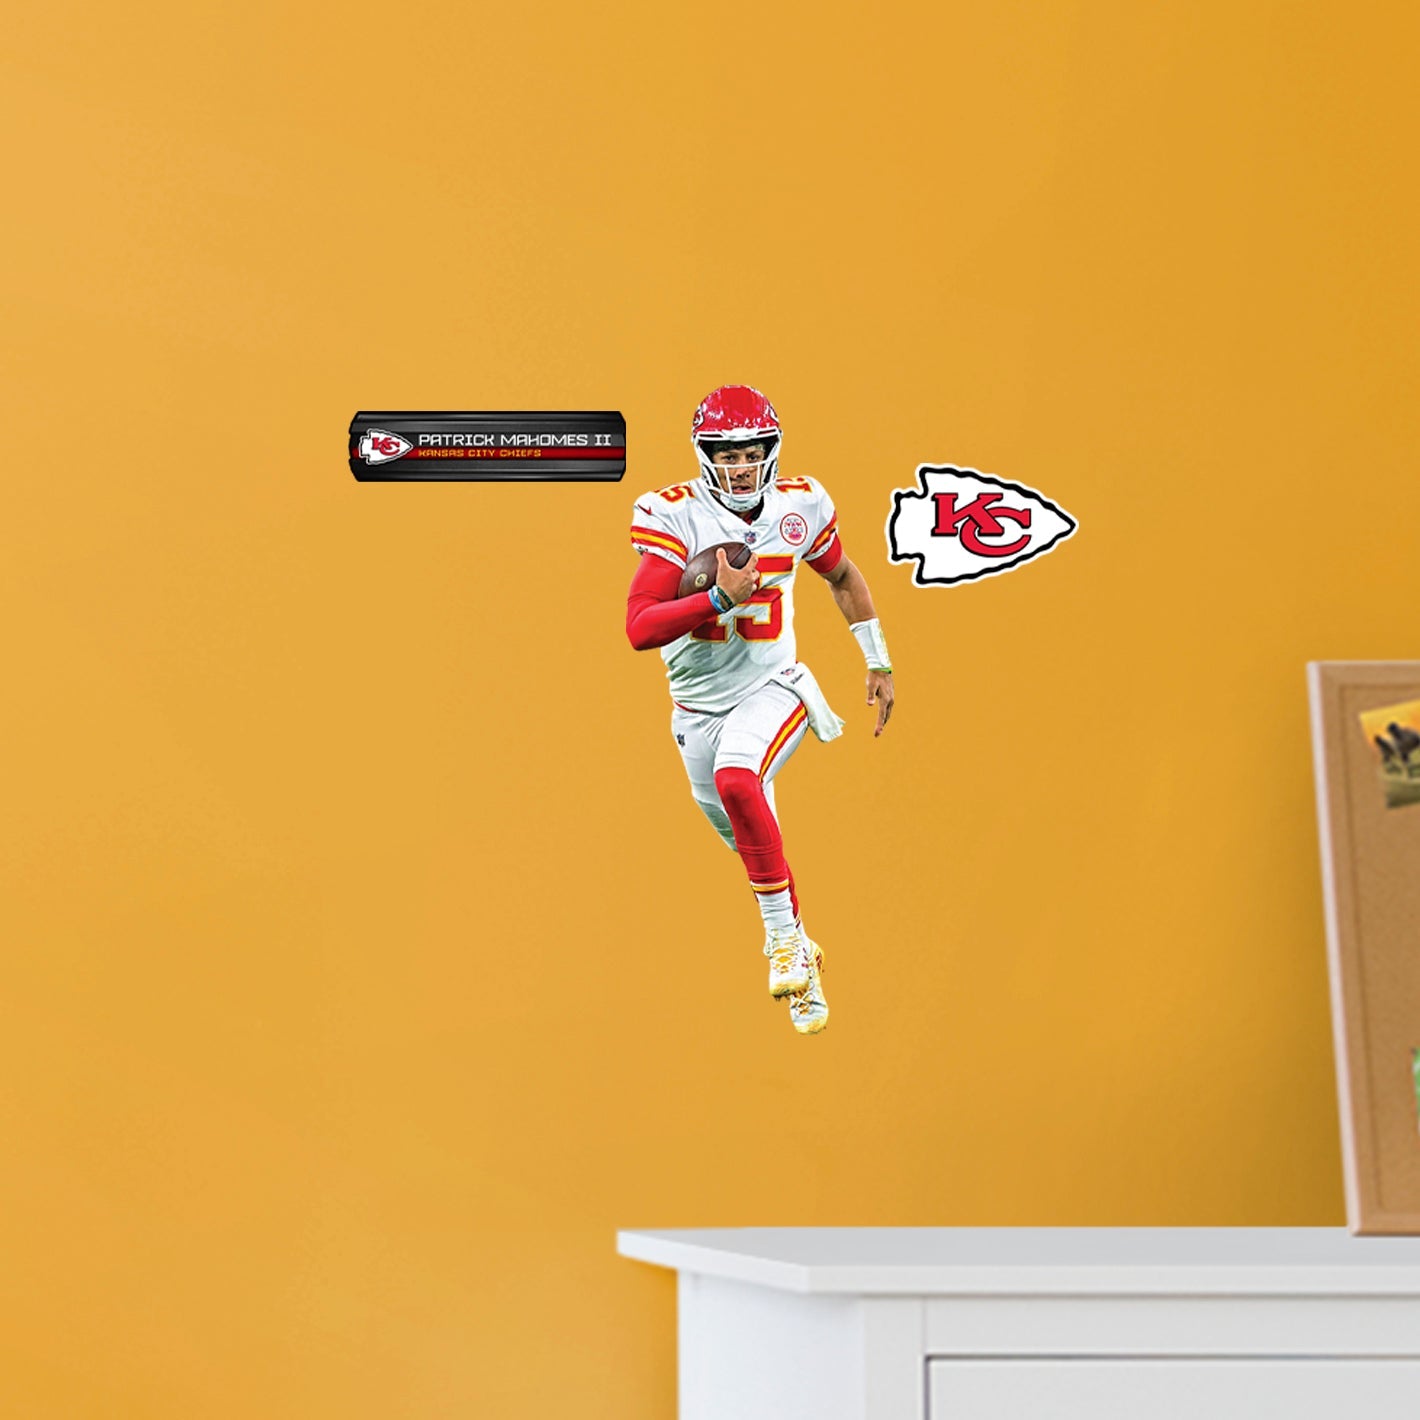 Kansas City Chiefs: Patrick Mahomes II Rush - Officially Licensed NFL Removable Adhesive Decal